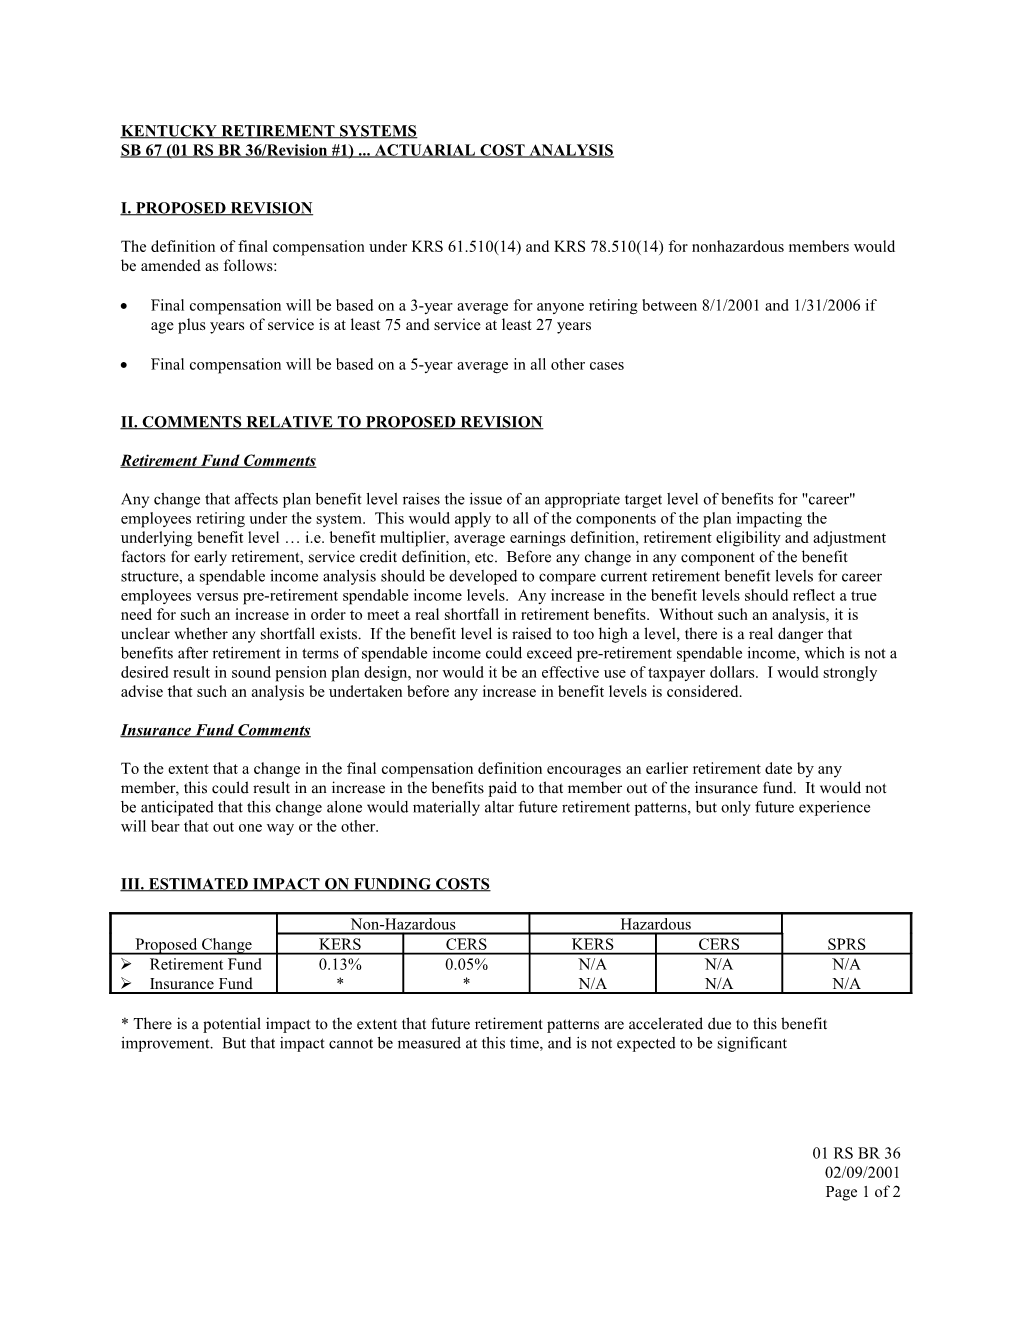 SB 67 (01 RS BR 36/Revision #1) ACTUARIAL COST ANALYSIS